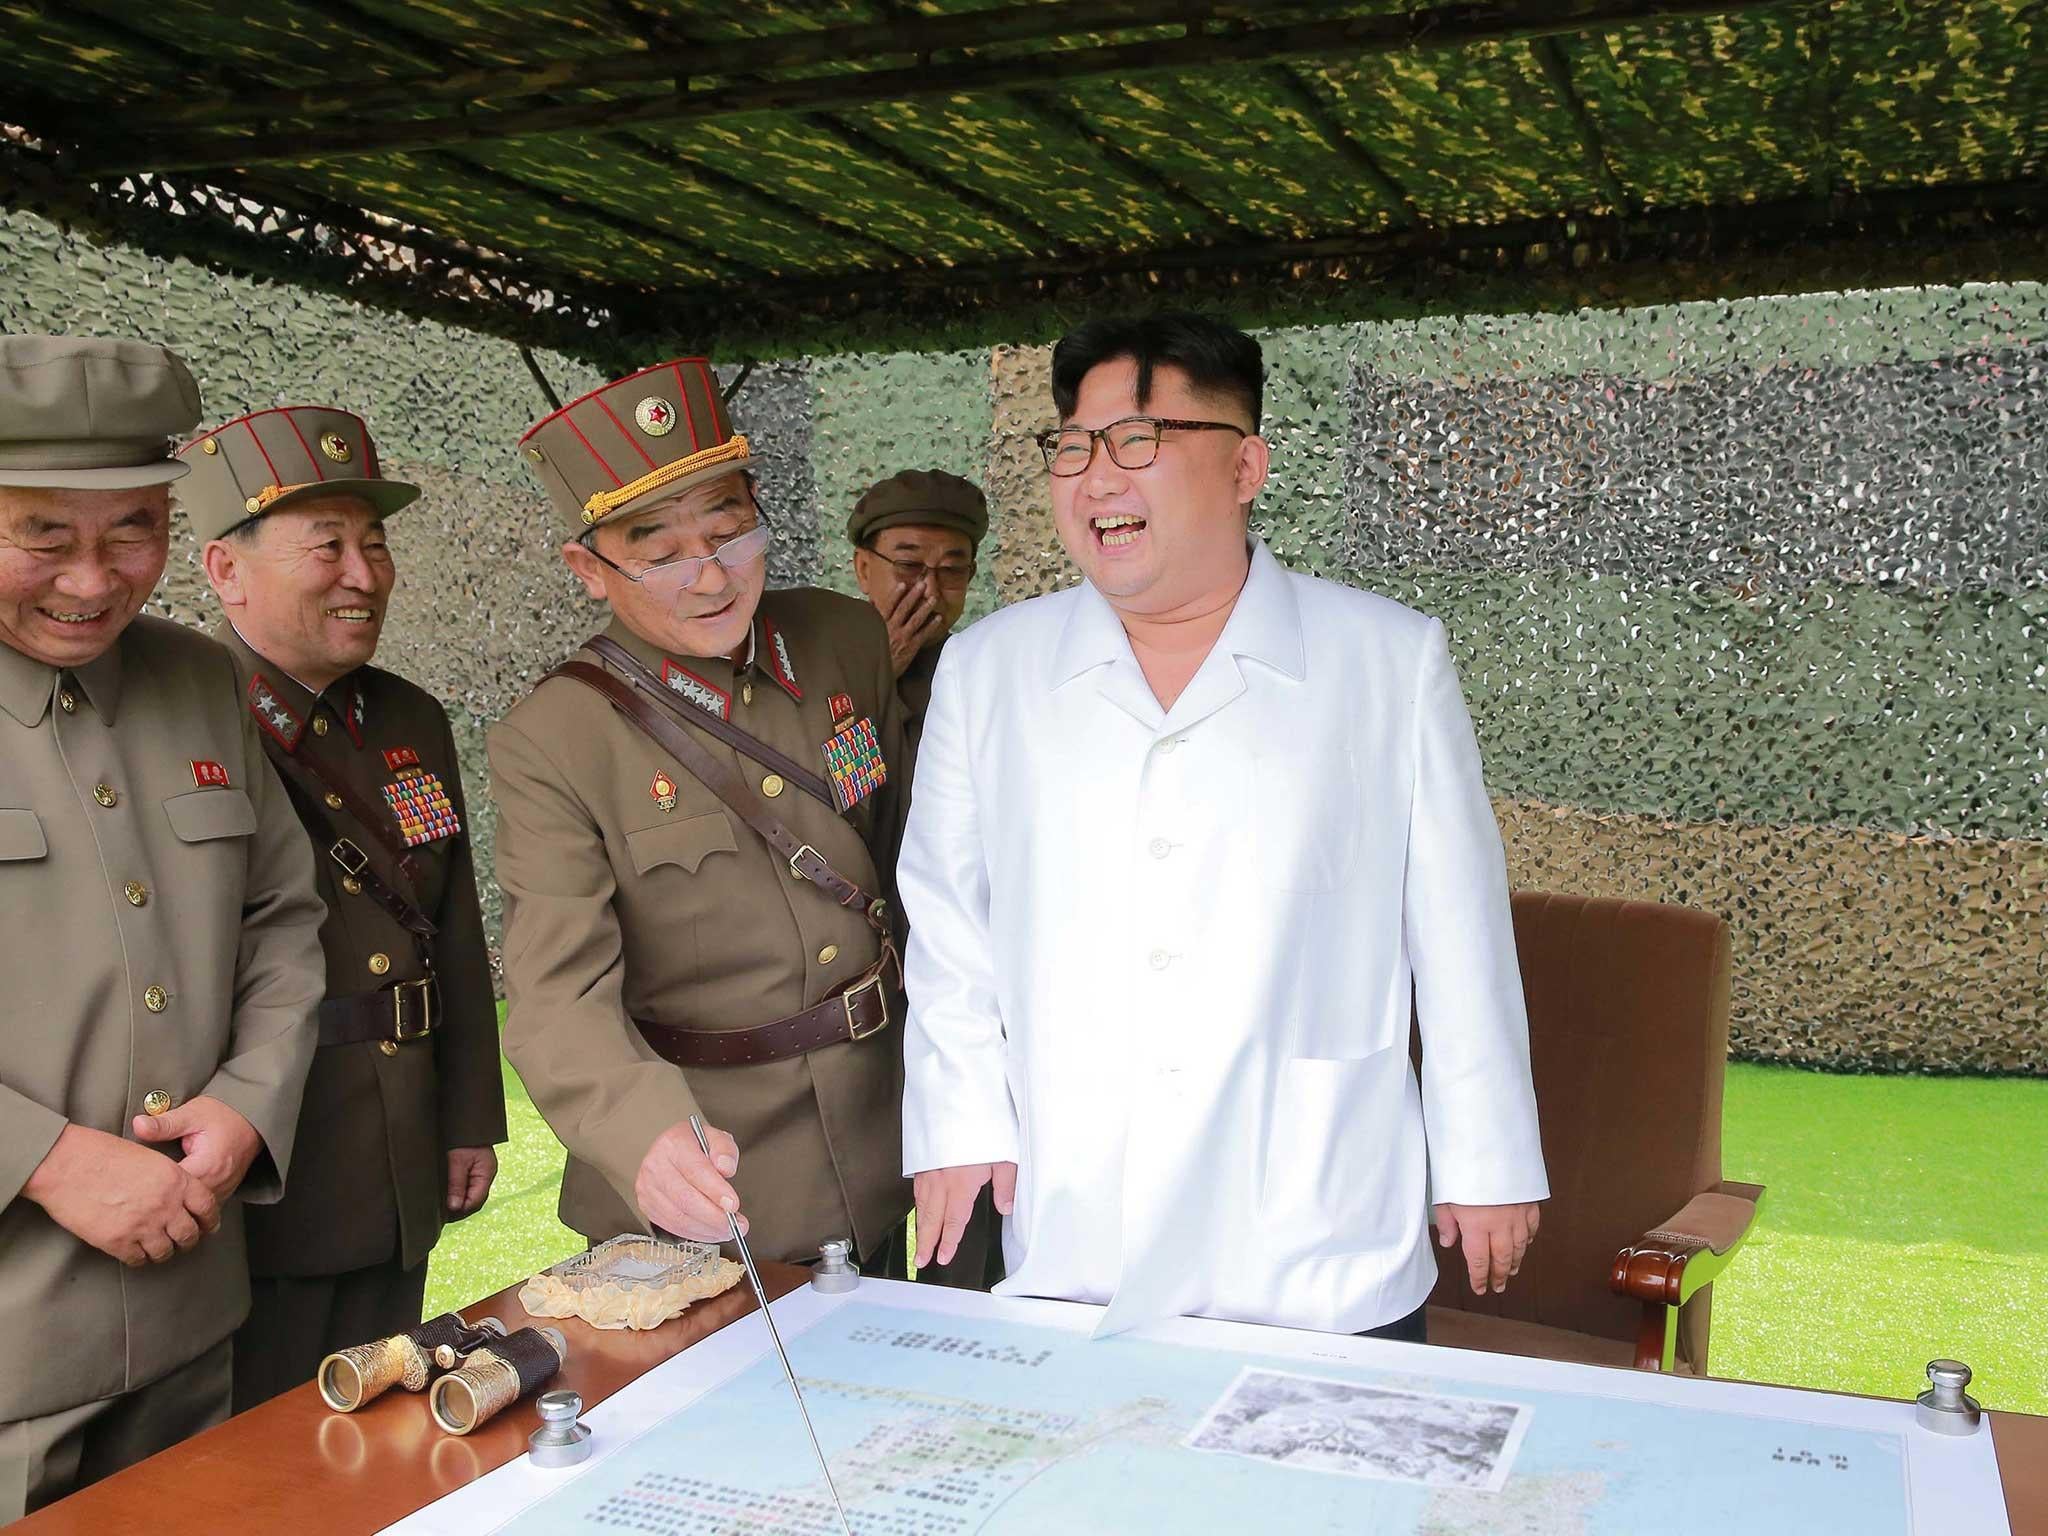 North Korea announced on Friday that it had carried out a successful nuclear test